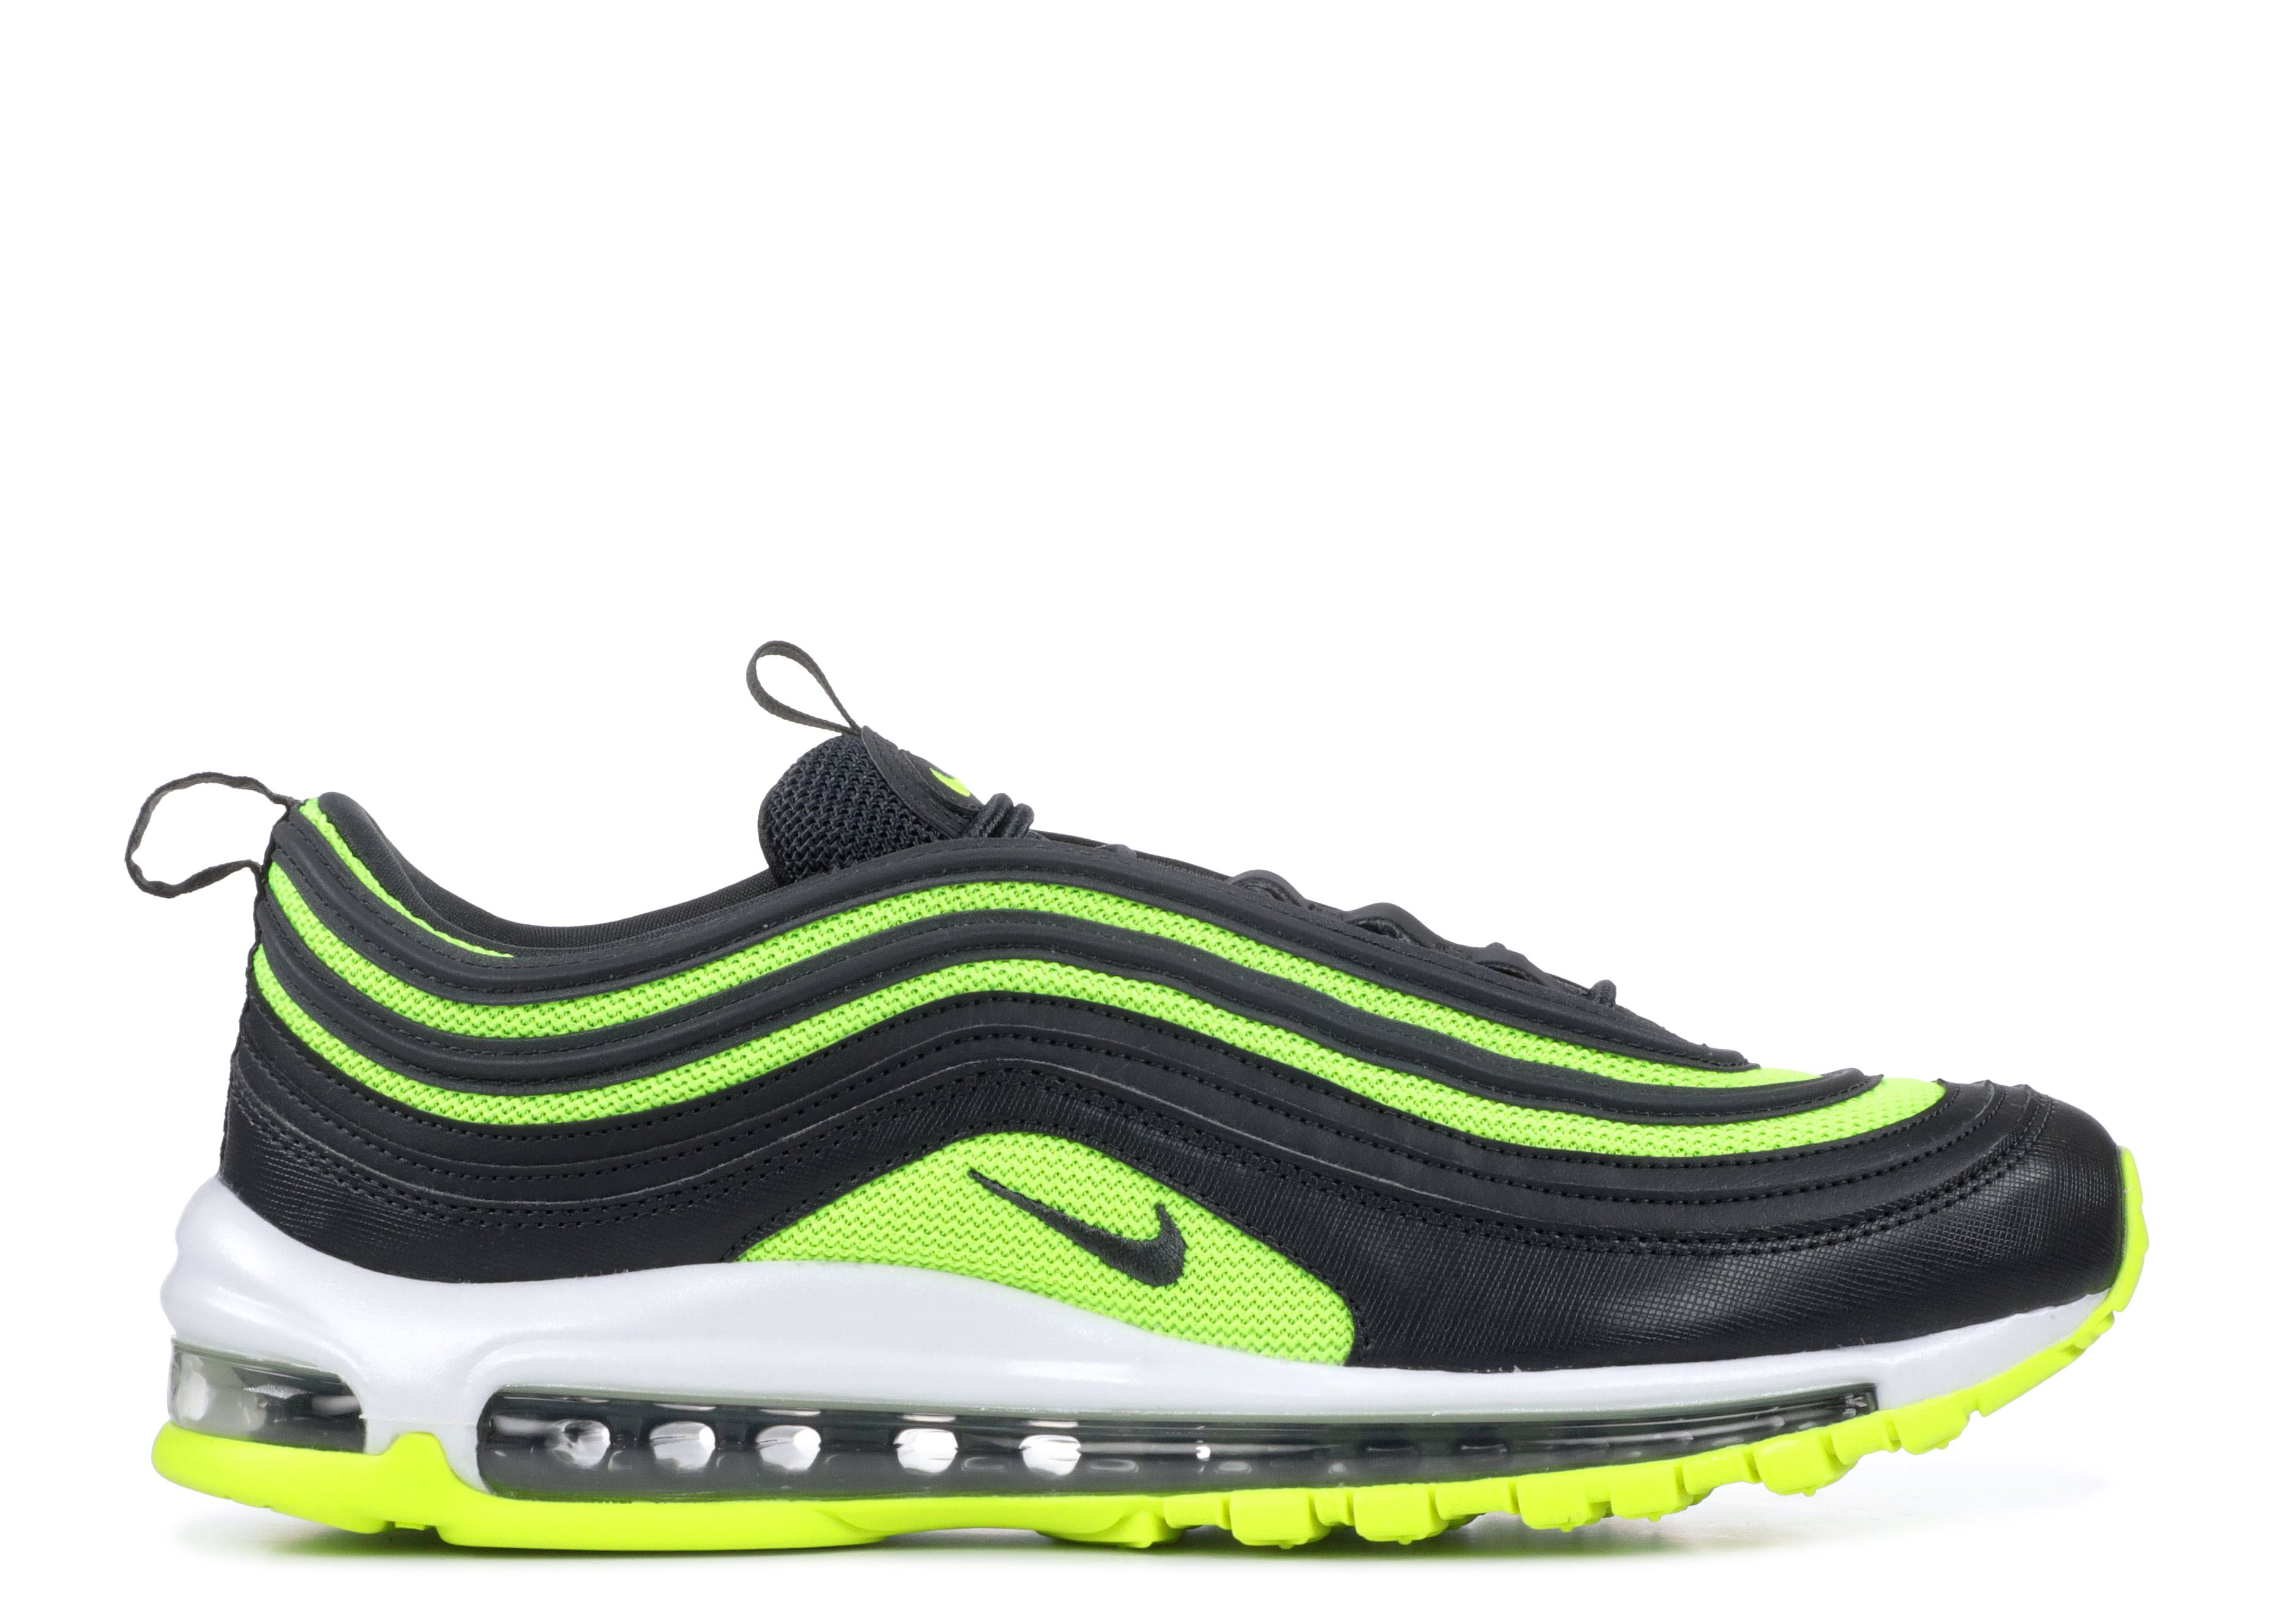 New Fall Colorways for the Air Max 97 Nike News